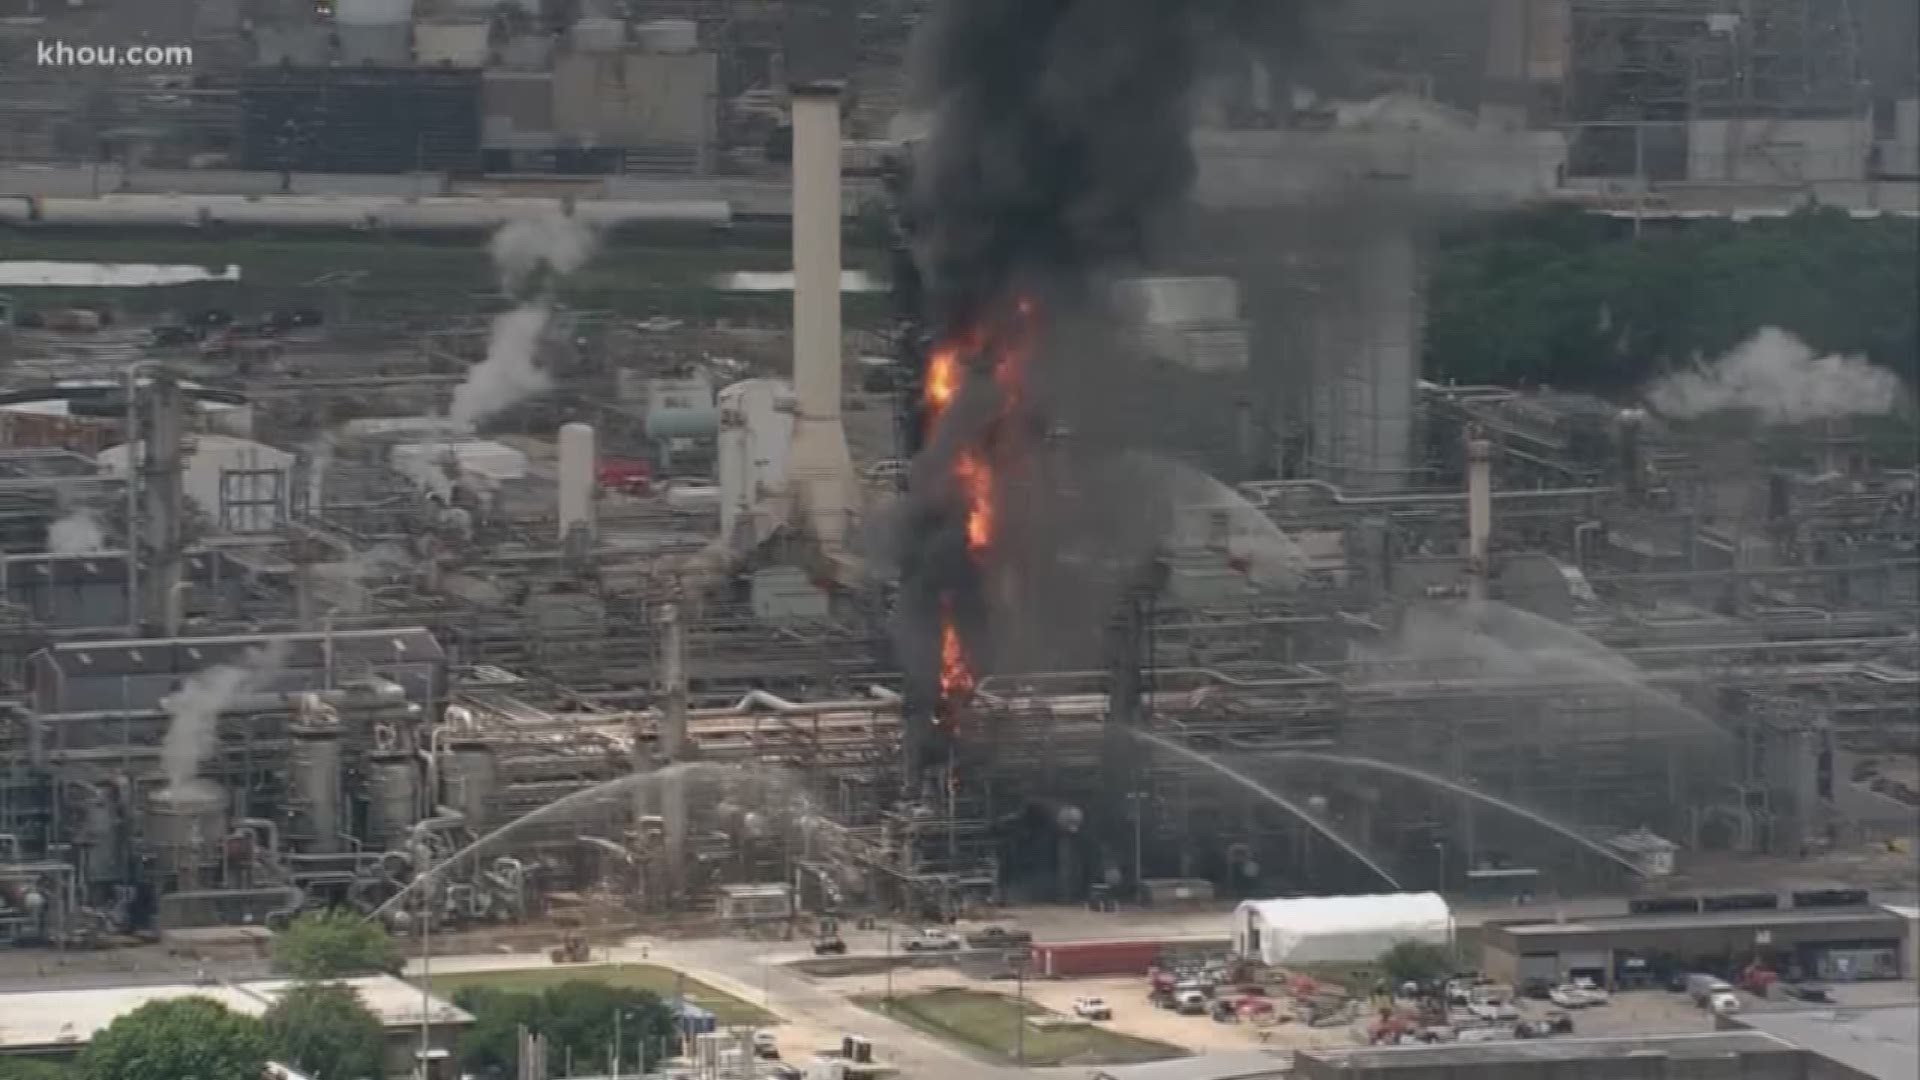 If you were near the ExxonMobil Baytown Olefins Plant on Wednesday you either saw, heard, or smelled the explosion or fire. The flames and dark smoke shooting from the refinery sparked fear in the community.